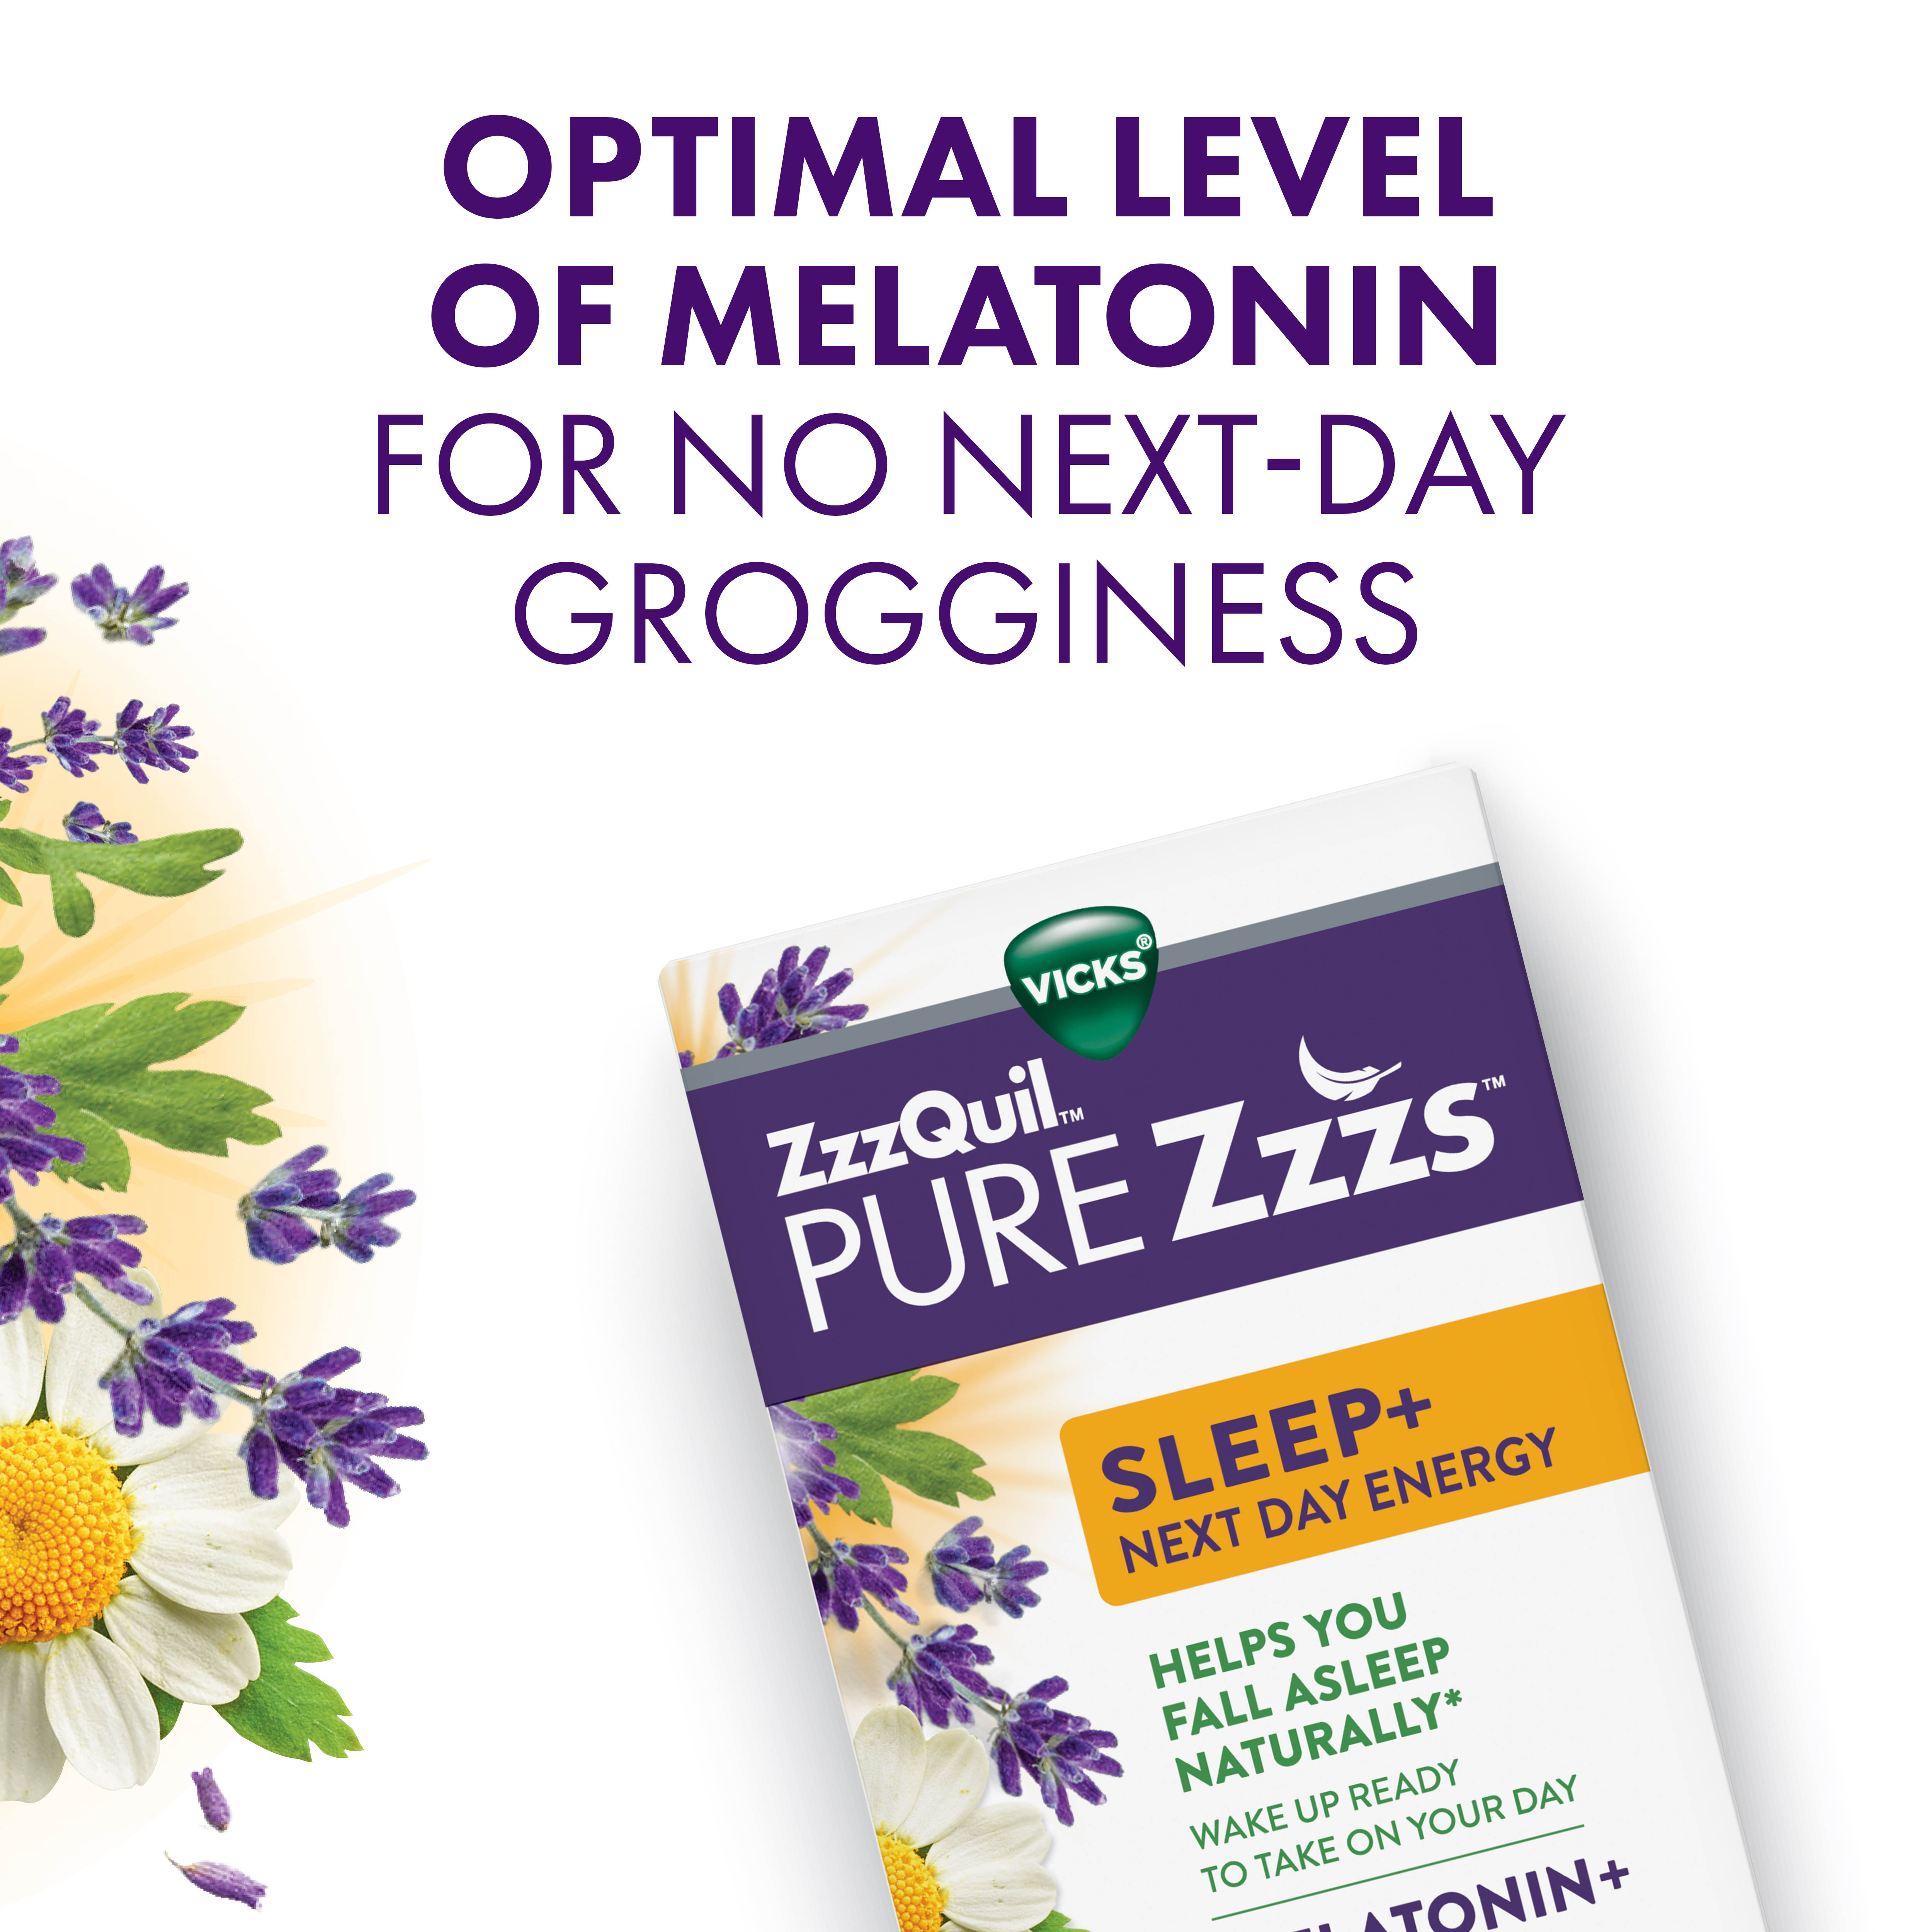 ZzzQuil PURE Zzzs Sleep+ Next Day Energy Tablets | ZzzQuil